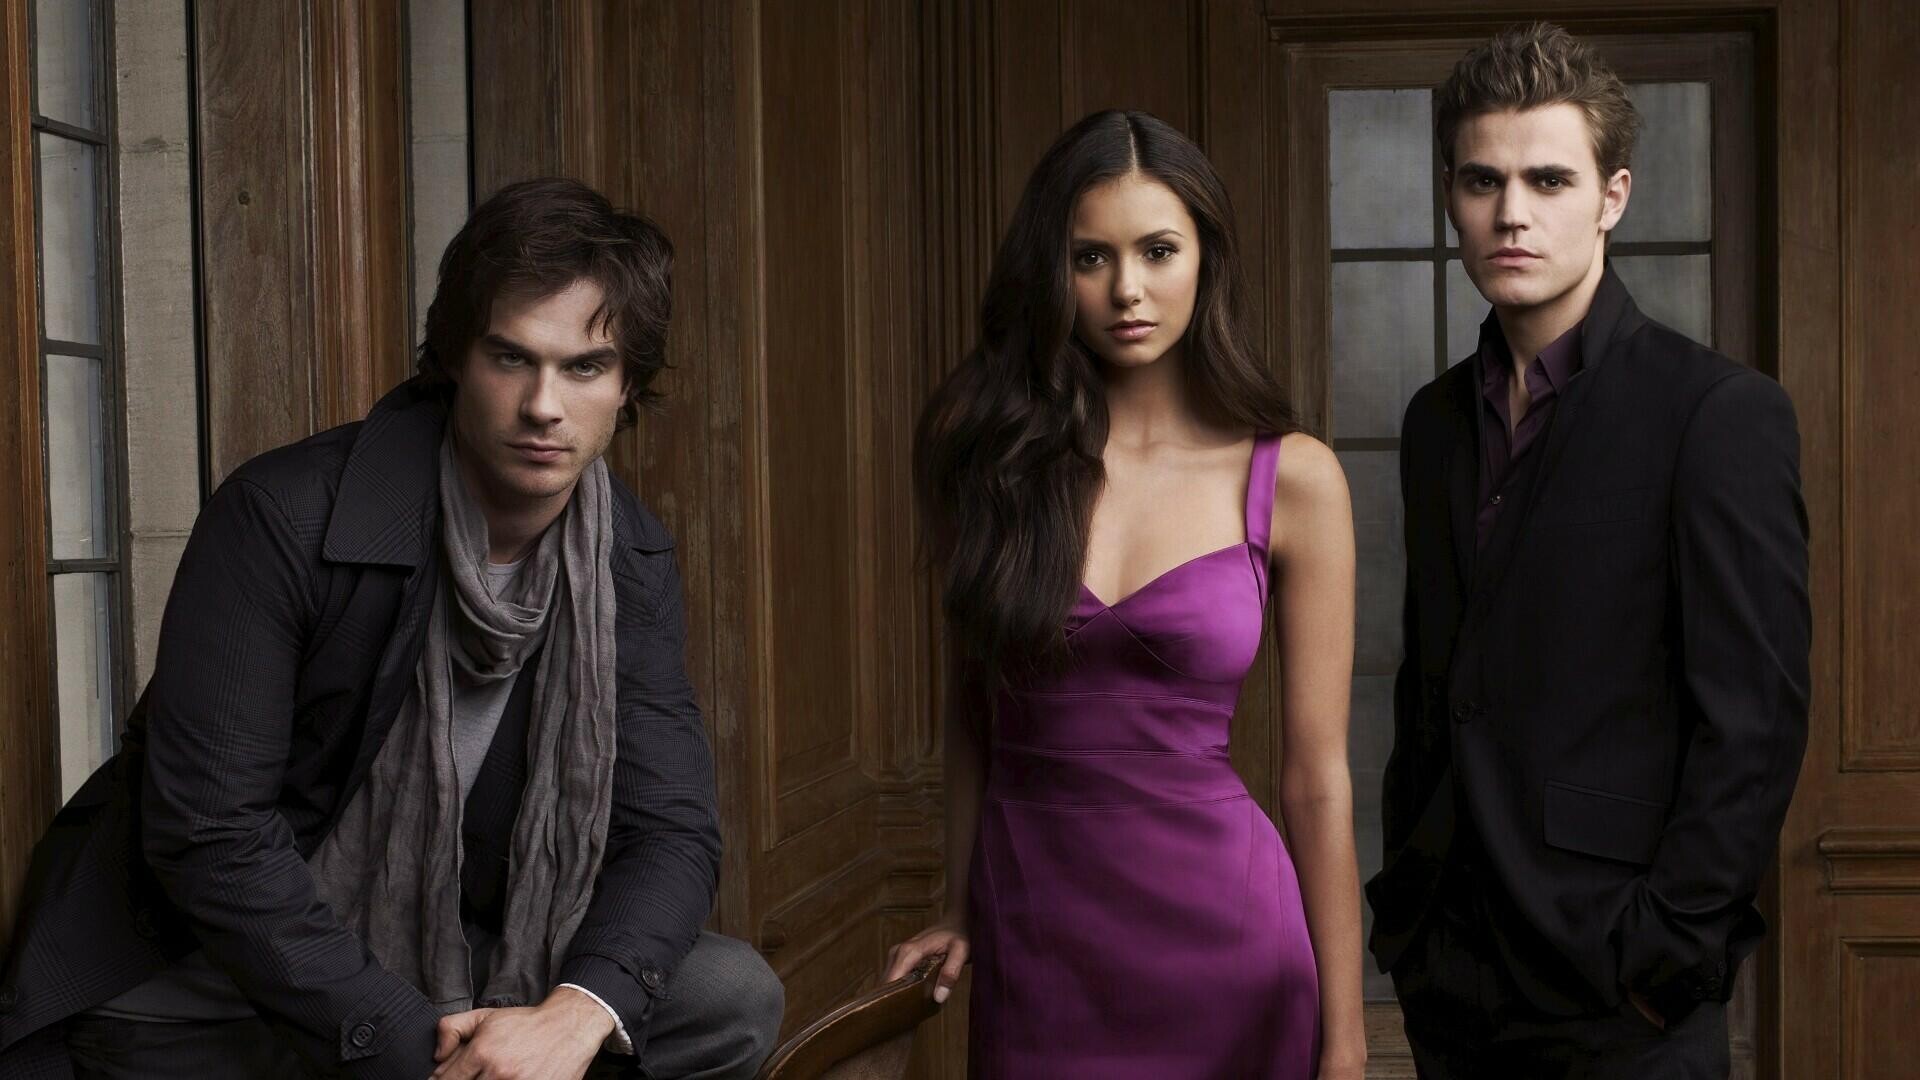 The Vampire Diaries (TV Series): High School Girl, Heart Torn Between Two Vampire Brothers, Mystery, Romance, Thriller. 1920x1080 Full HD Wallpaper.